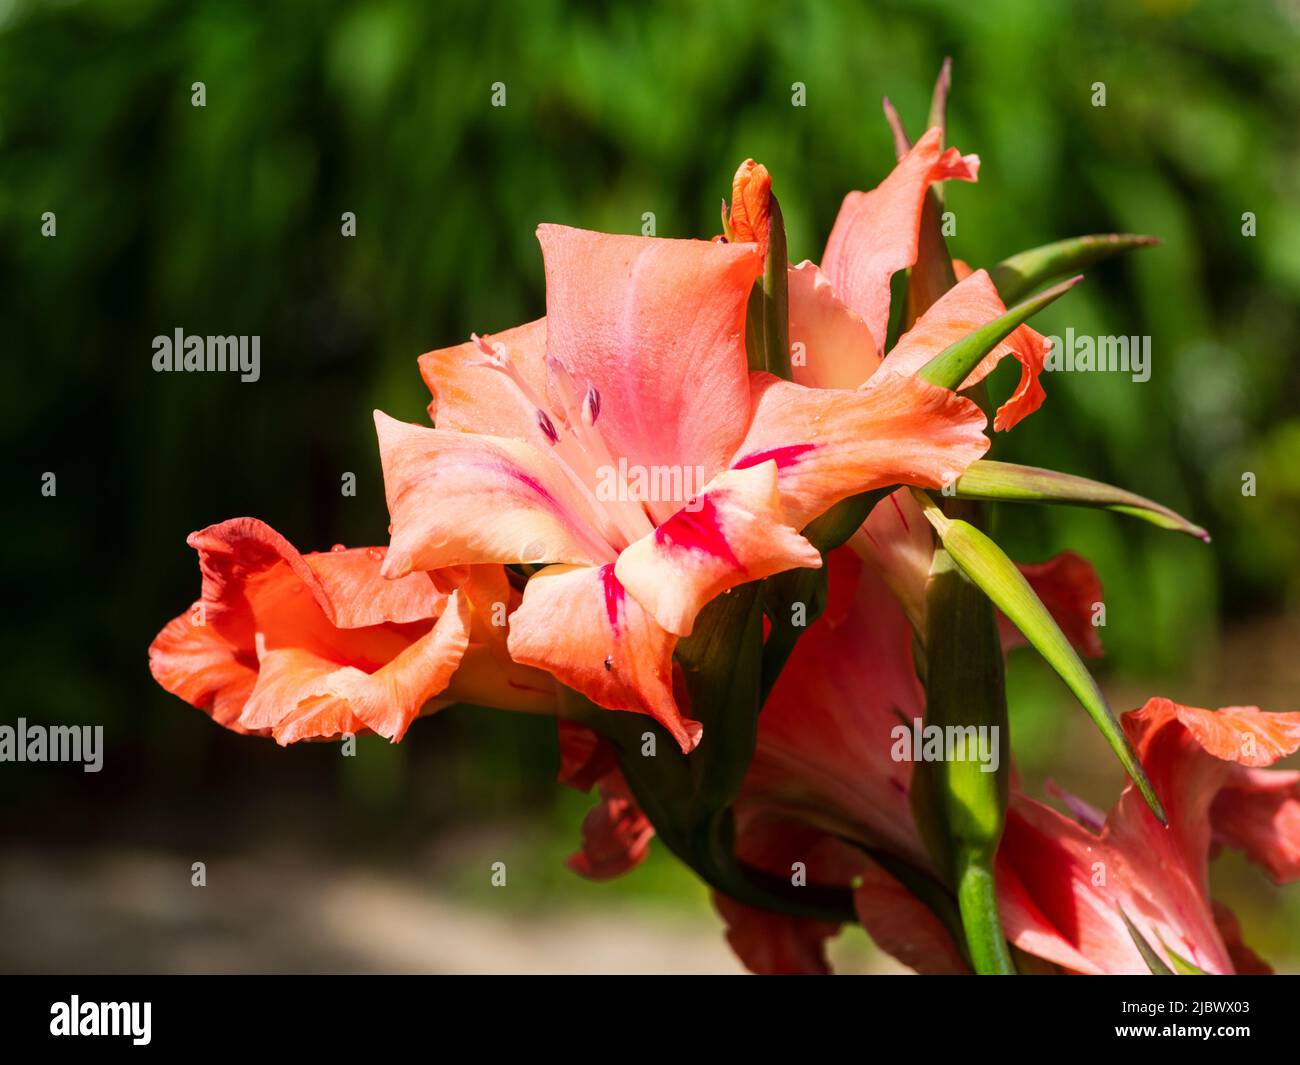 Pink and red flowers of the early summer blooming hardy corm, Gladiolus nanus 'Nathalie' Stock Photo